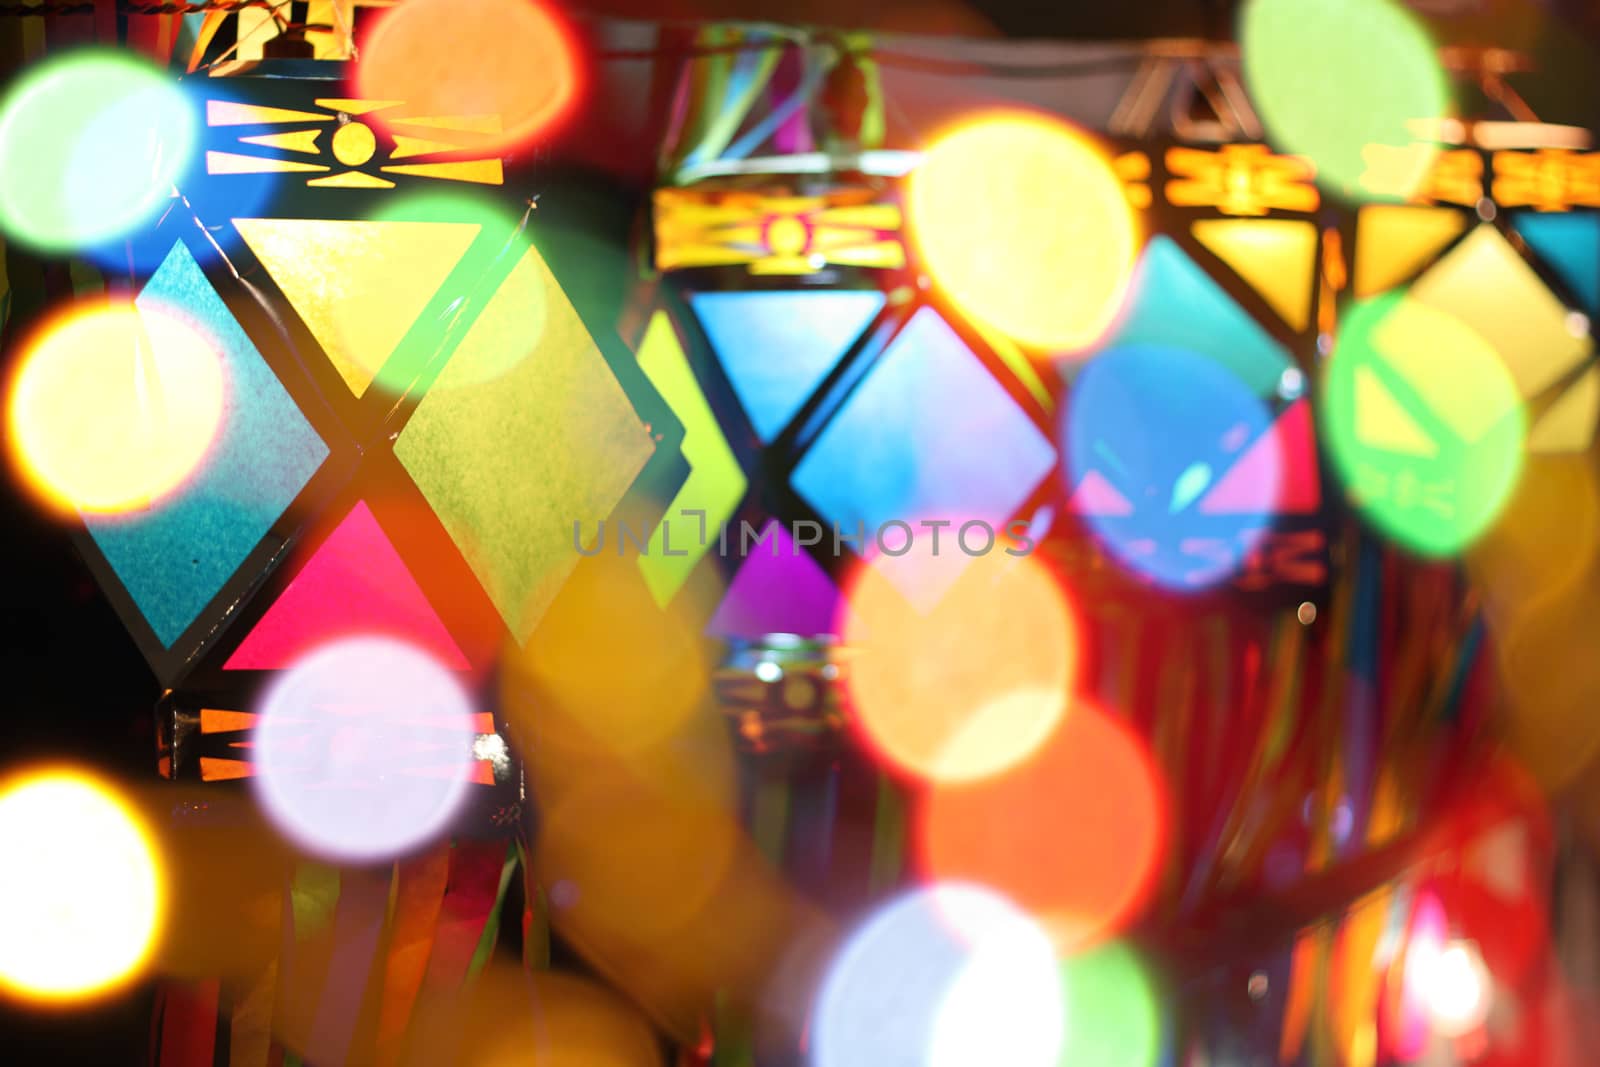 A view of traditional Diwali lanters through colorful lights out of focus.